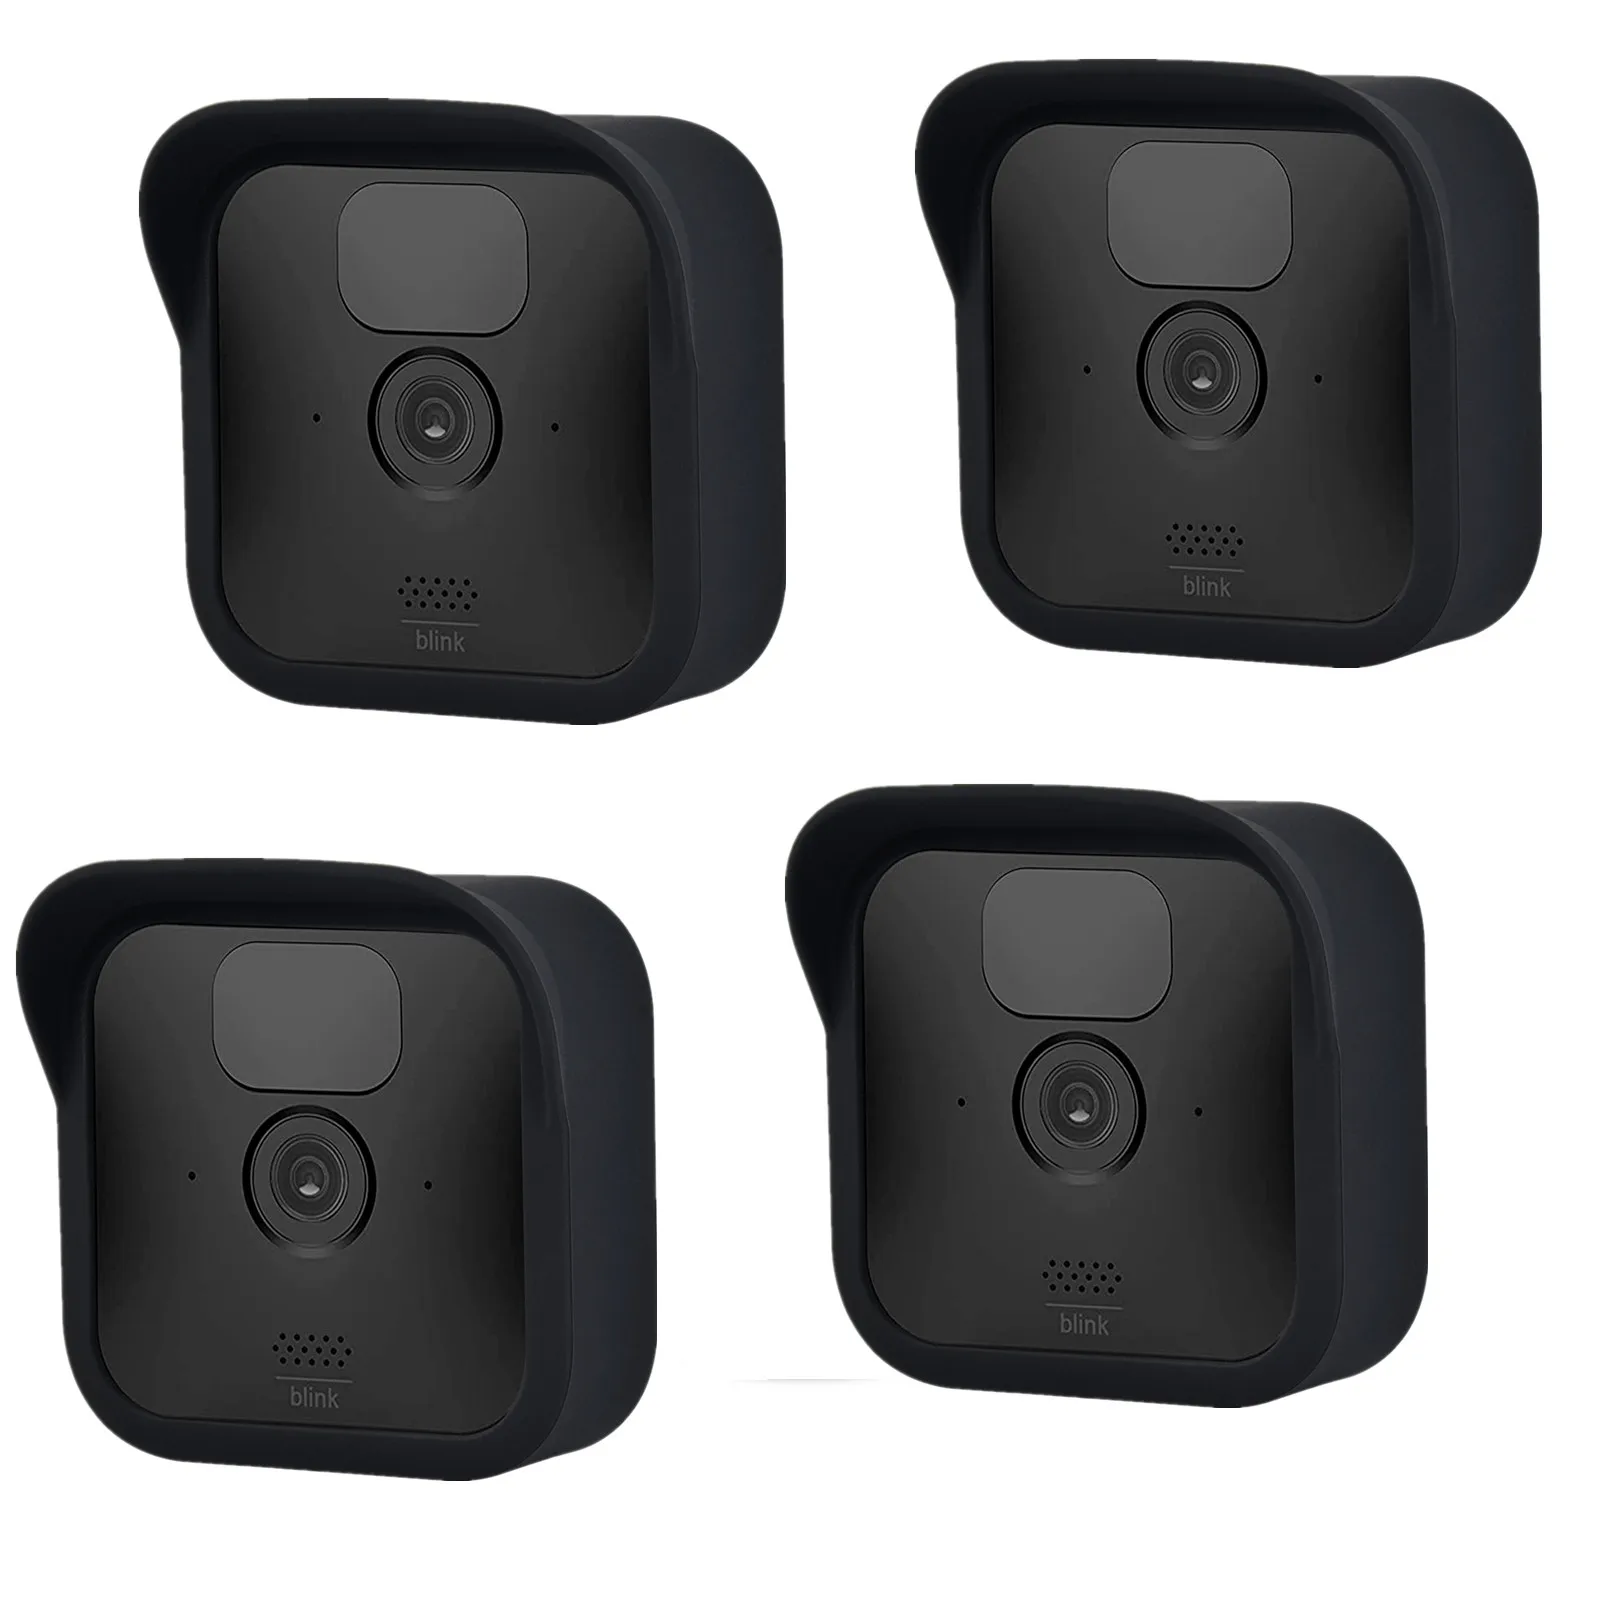 

4Pcs Silicone Cover for Blink XT2 XT Camera, UV Weatherproof Protective Cover for Outdoor Indoor Home Security Camera Black